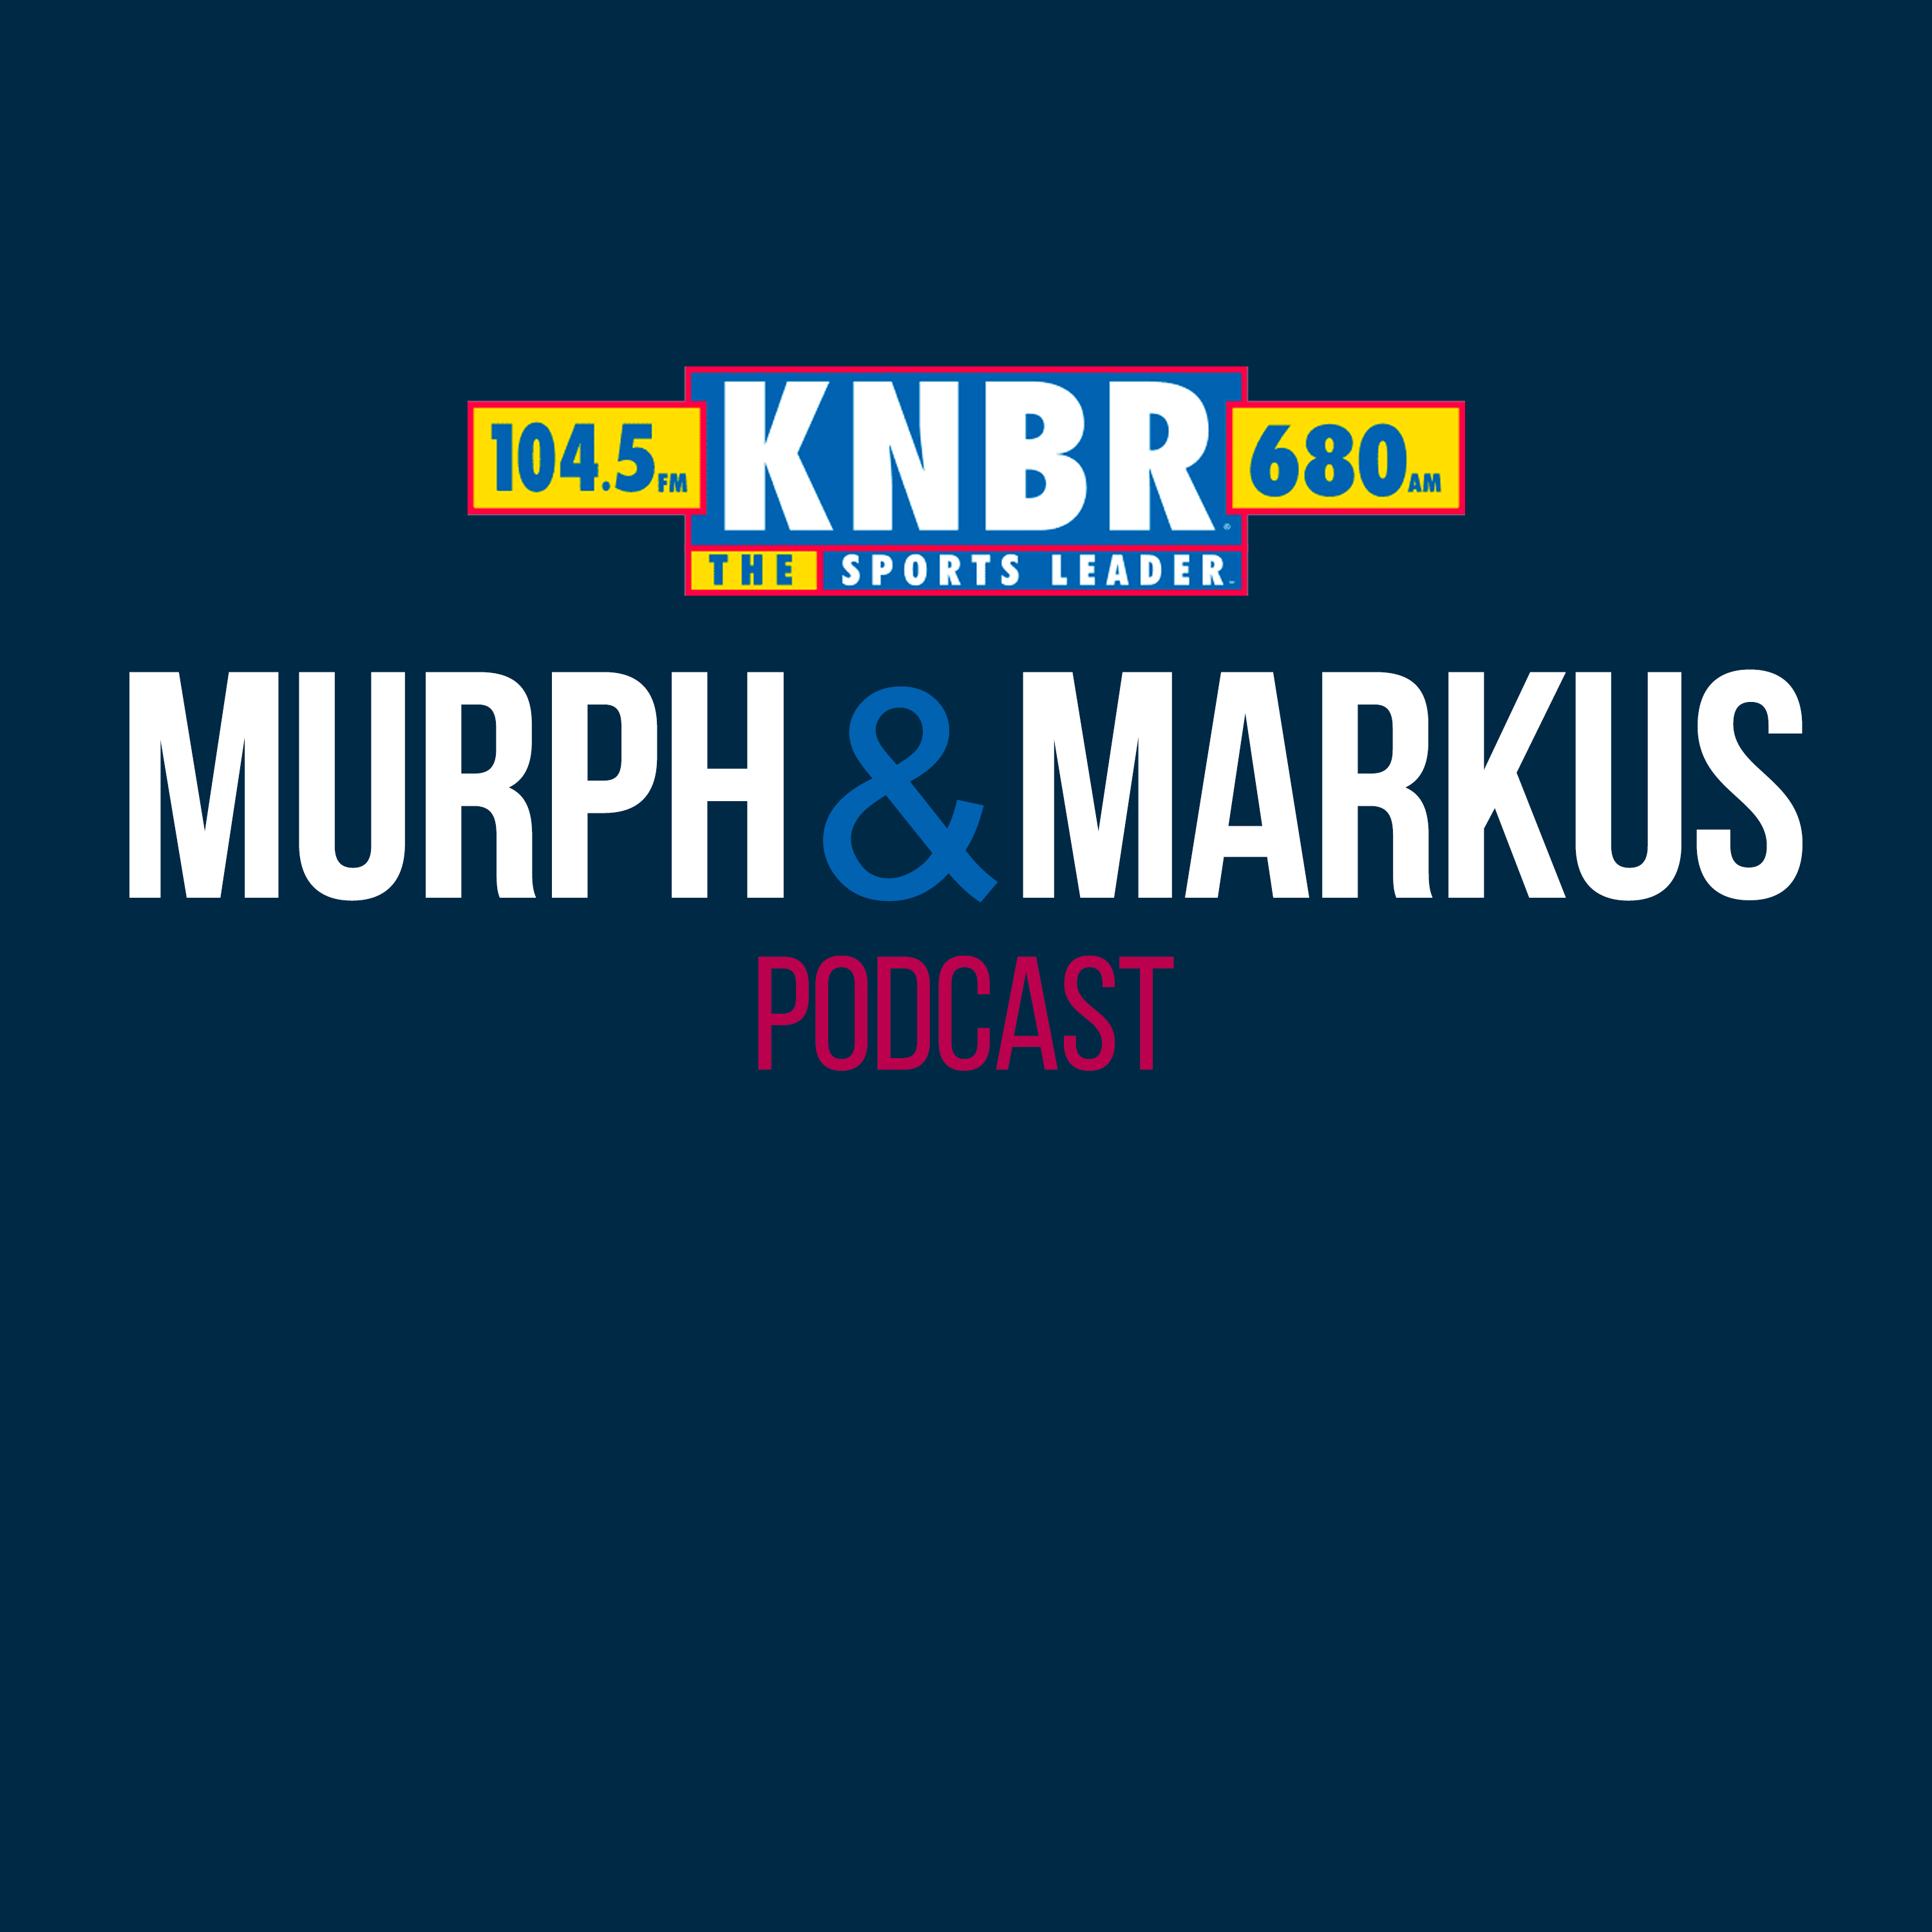 5-17 Hour 3: Murph & Markus dive into the Cooler of Content, react to some of Steve Kerr's comments from his interview with Raj Mathai, and talk to Bobby Evans